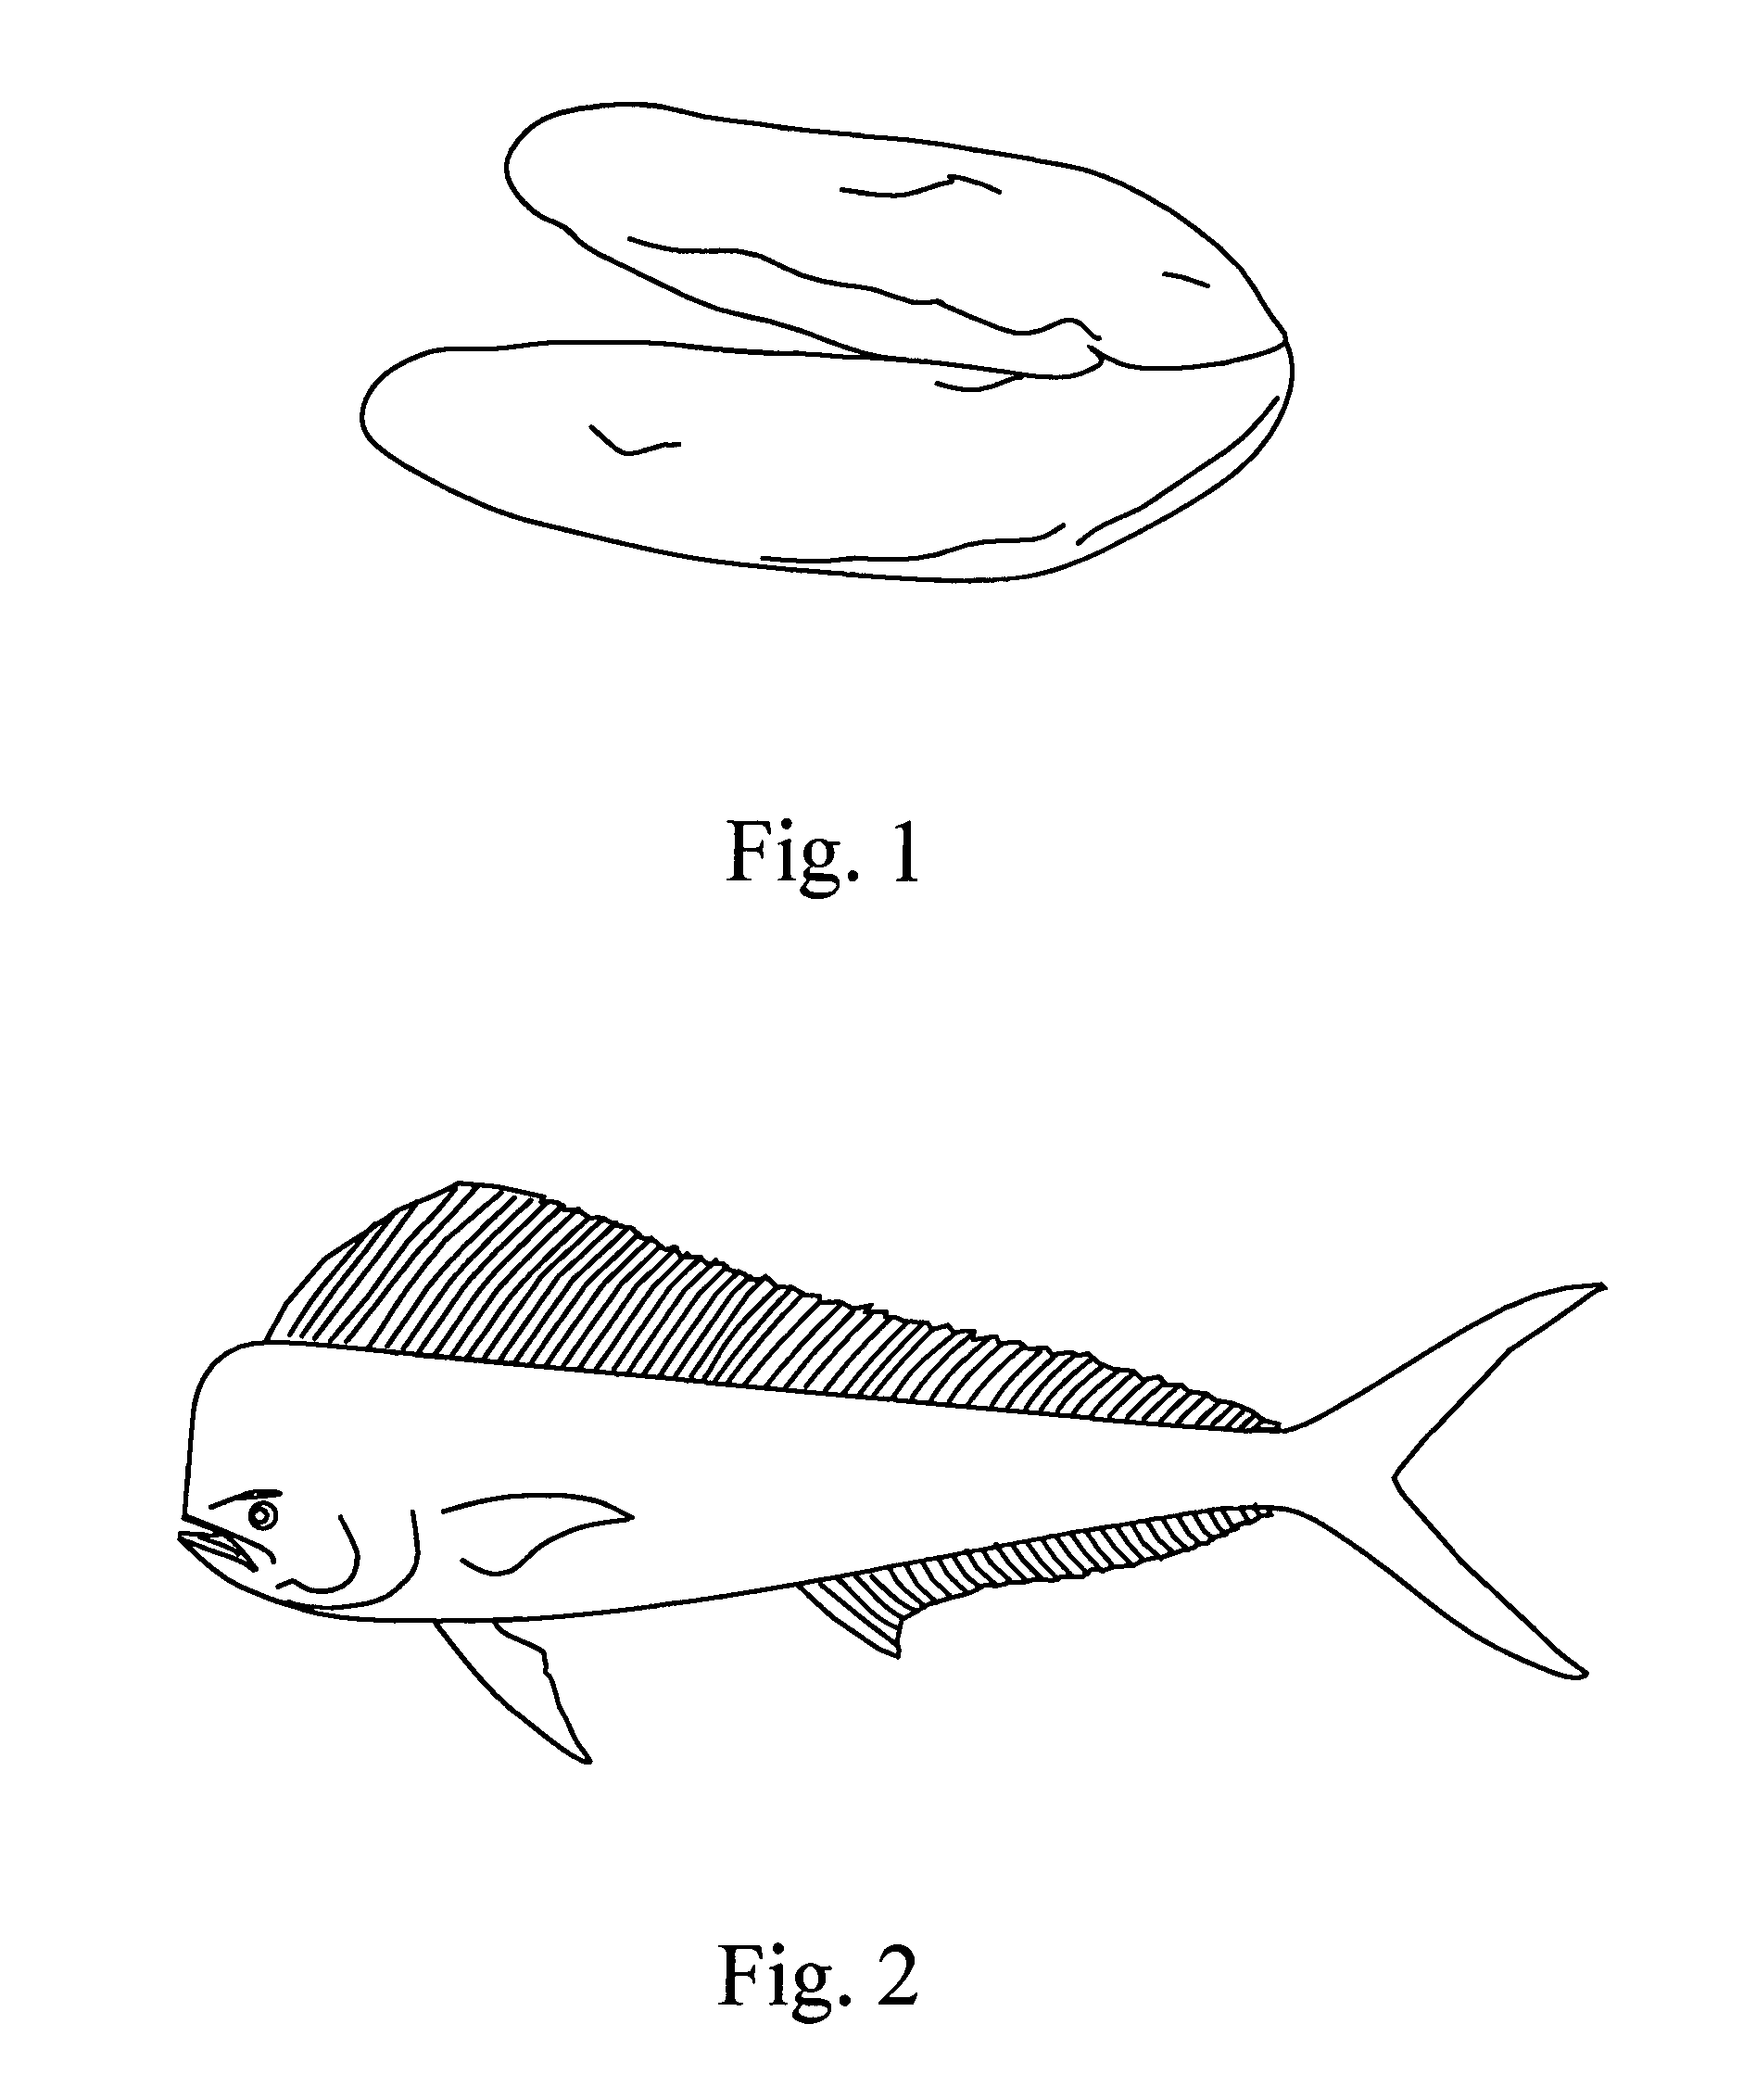 Mixtures of and methods of use for polyunsaturated fatty acid-containing phospholipids and alkyl ether phospholipids species